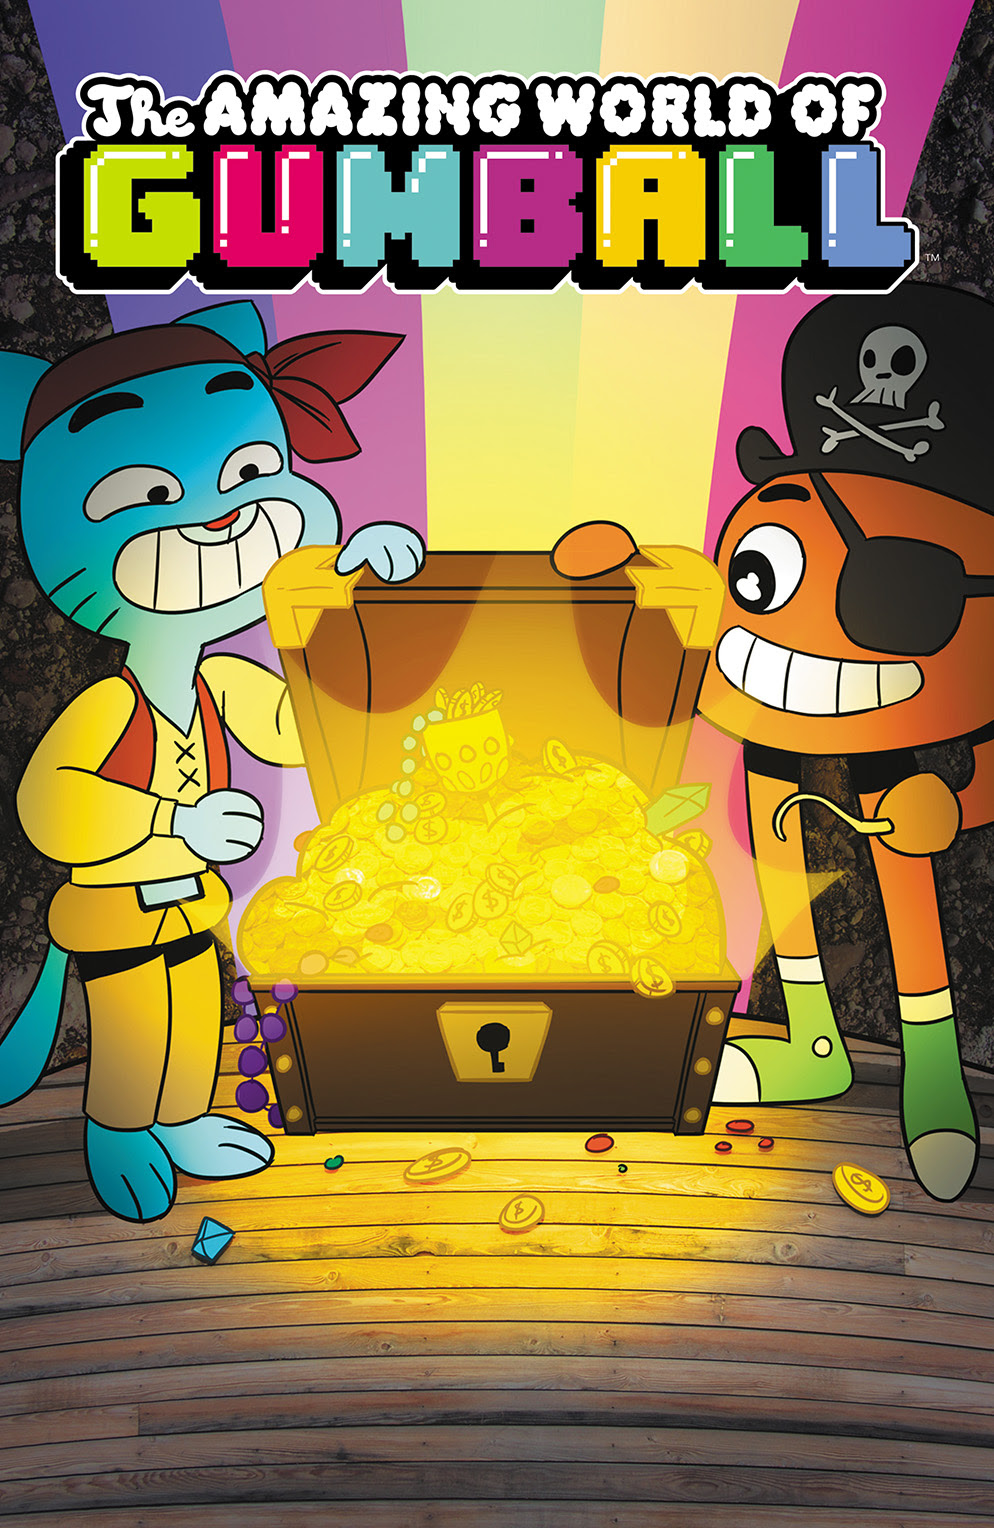 THE AMAZING WORLD OF GUMBALL #7 Cover B by Mildred Lewis